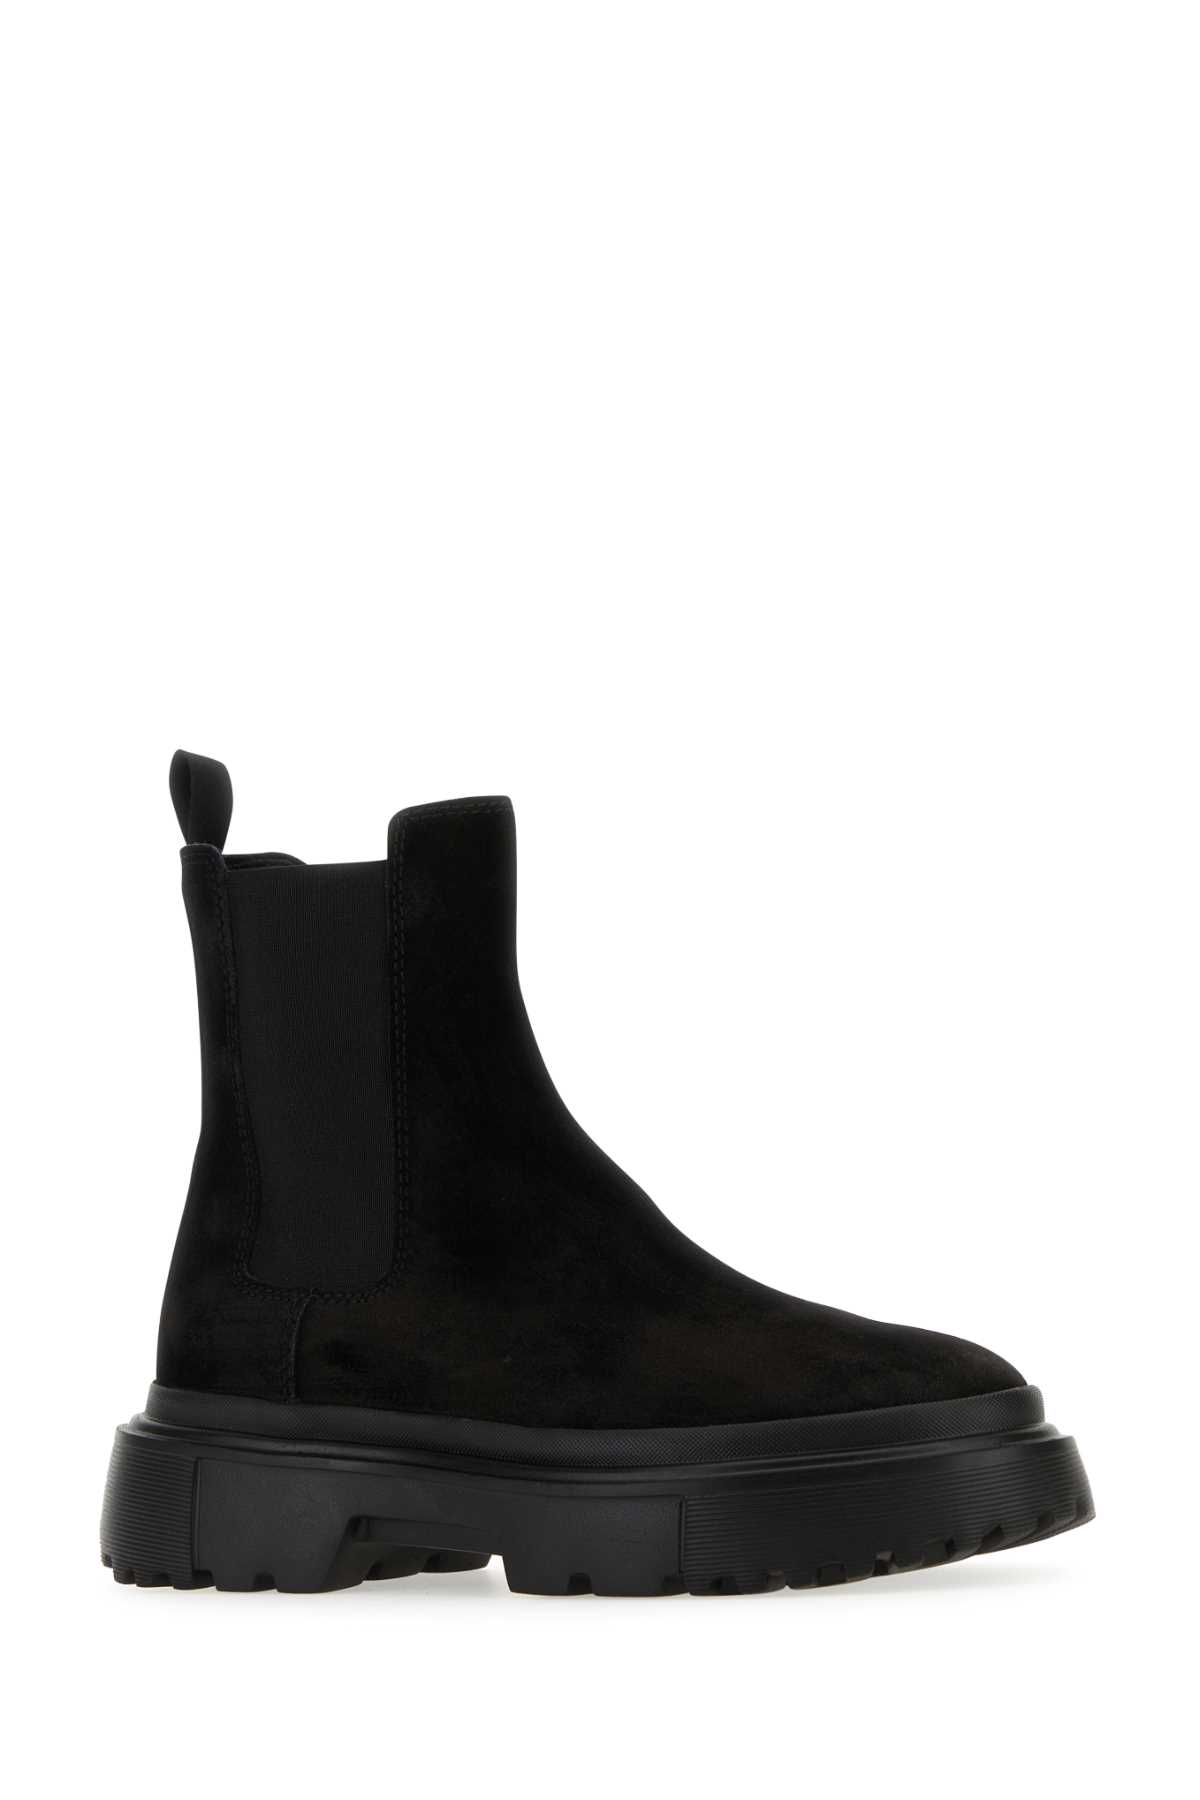 Shop Hogan Black Suede H619 Ankle Boots In B999